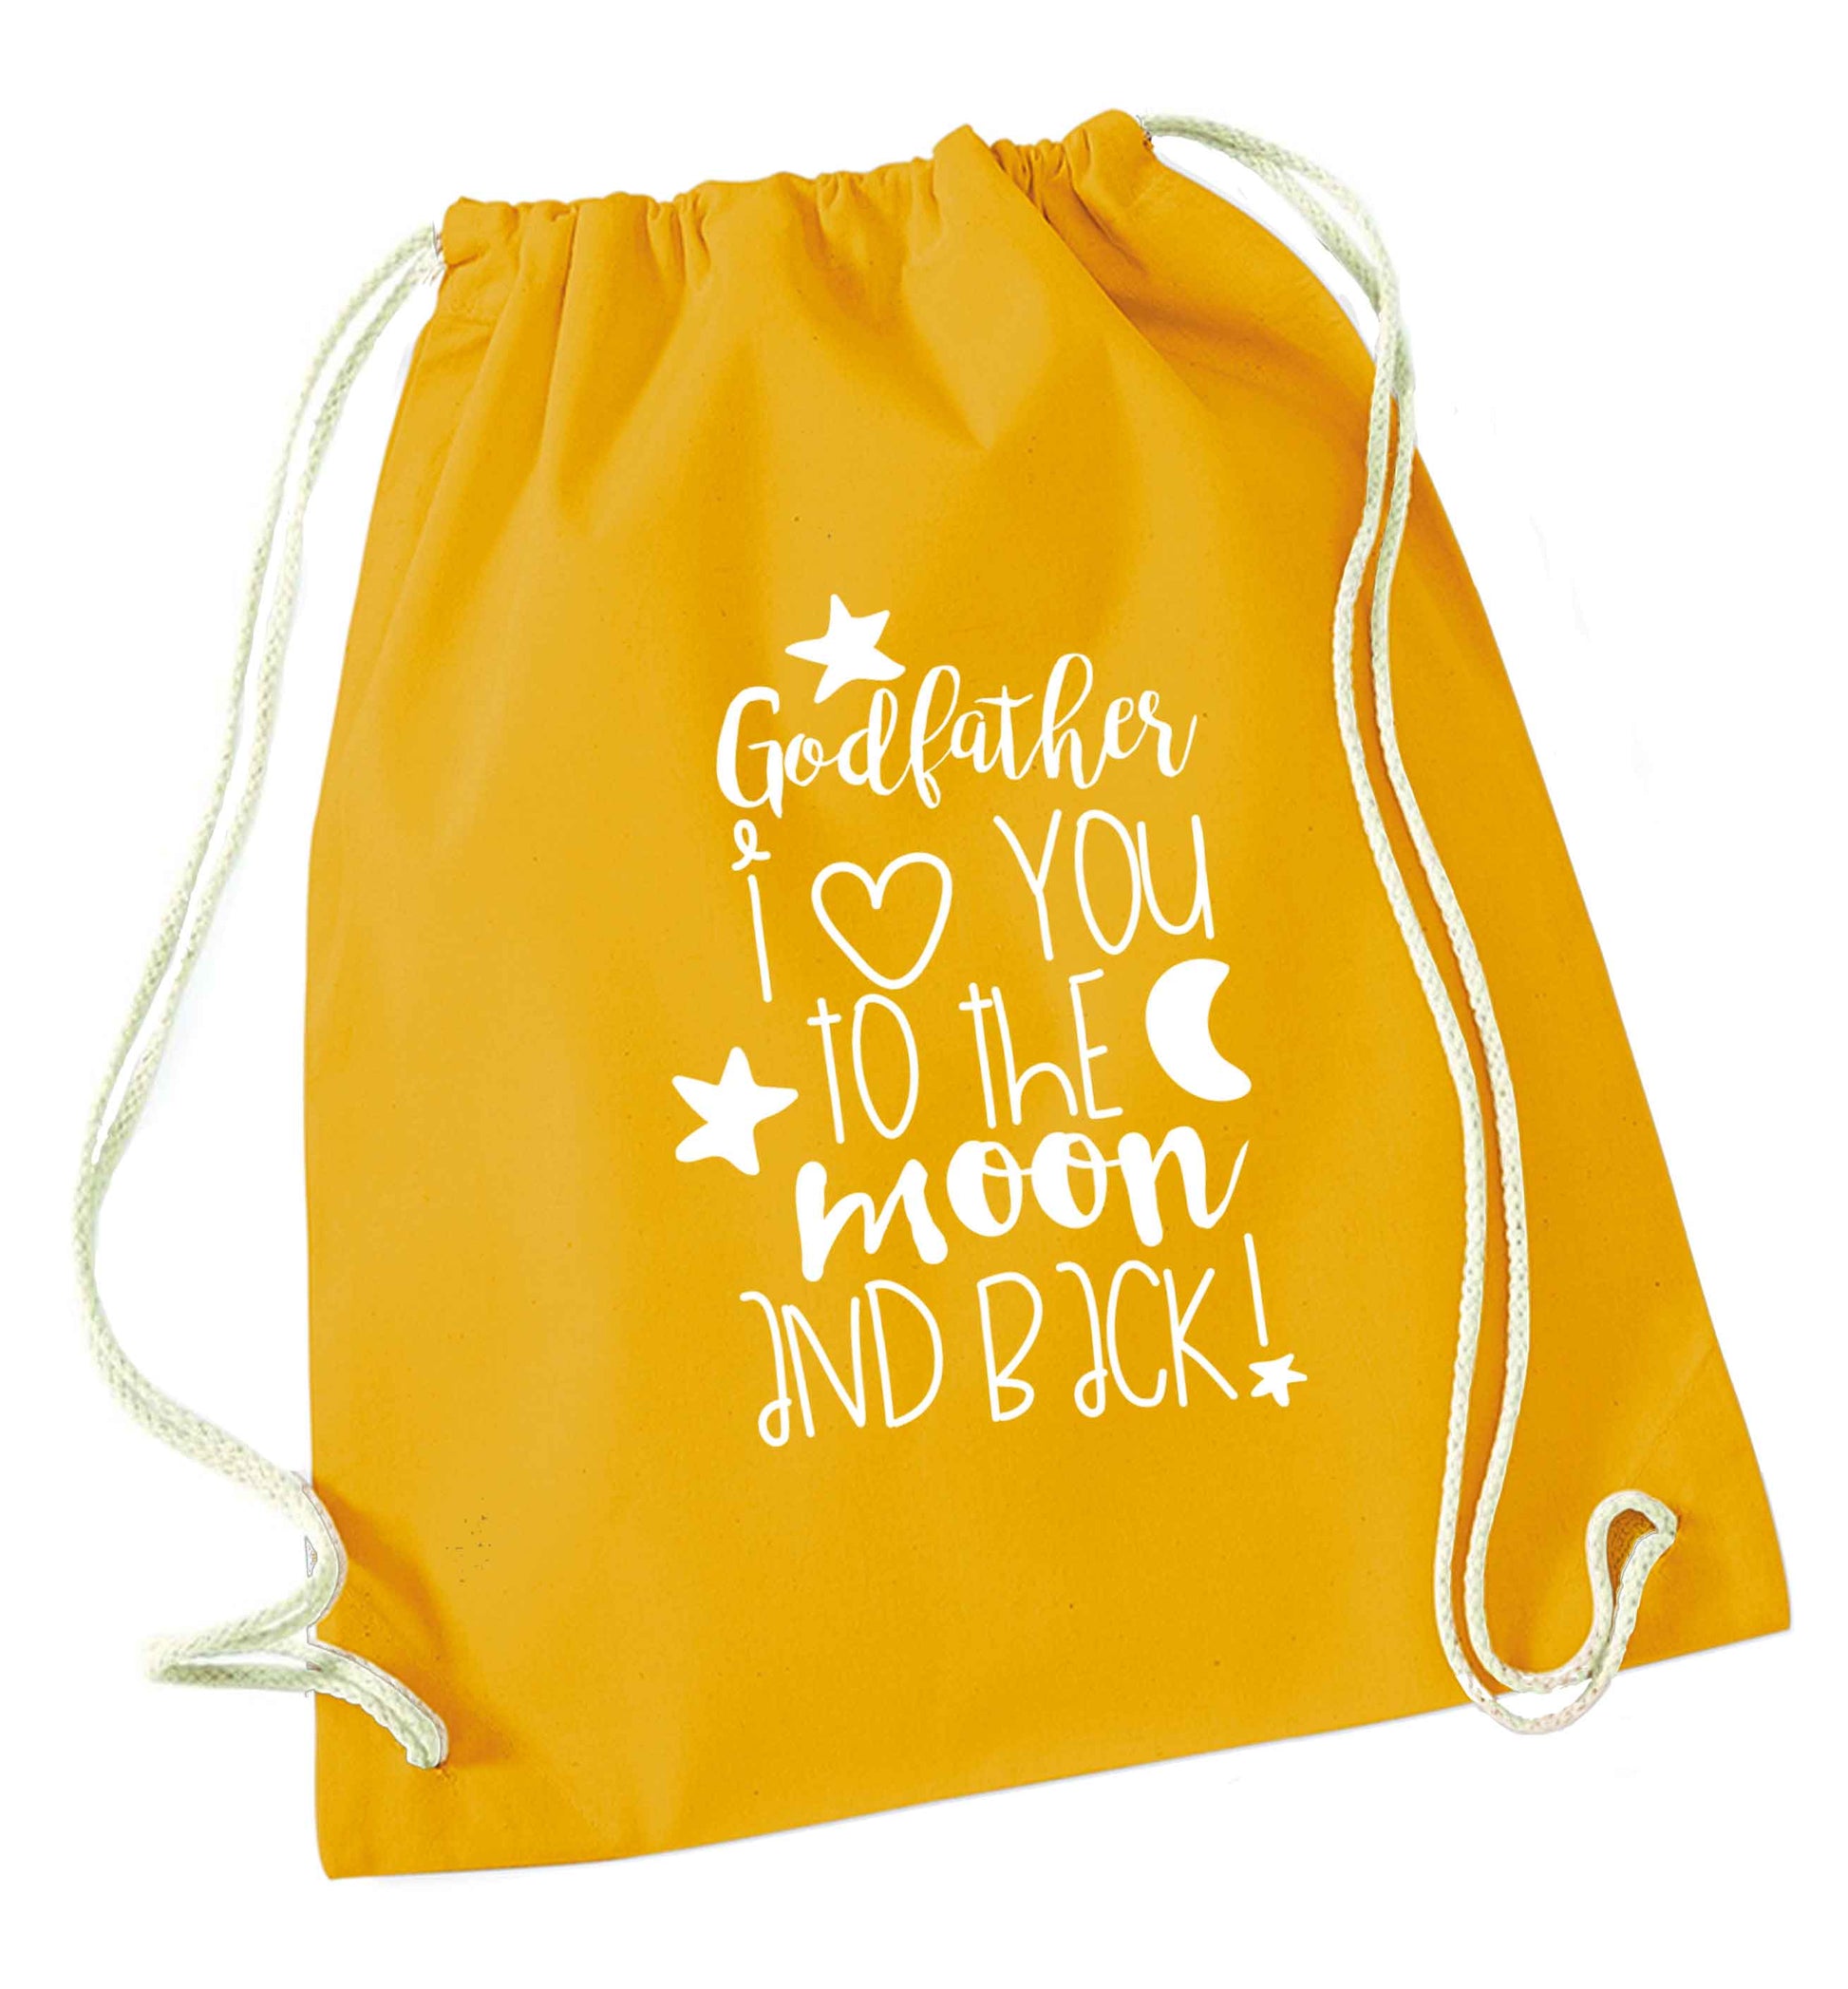 Godfather I love you to the moon and back mustard drawstring bag